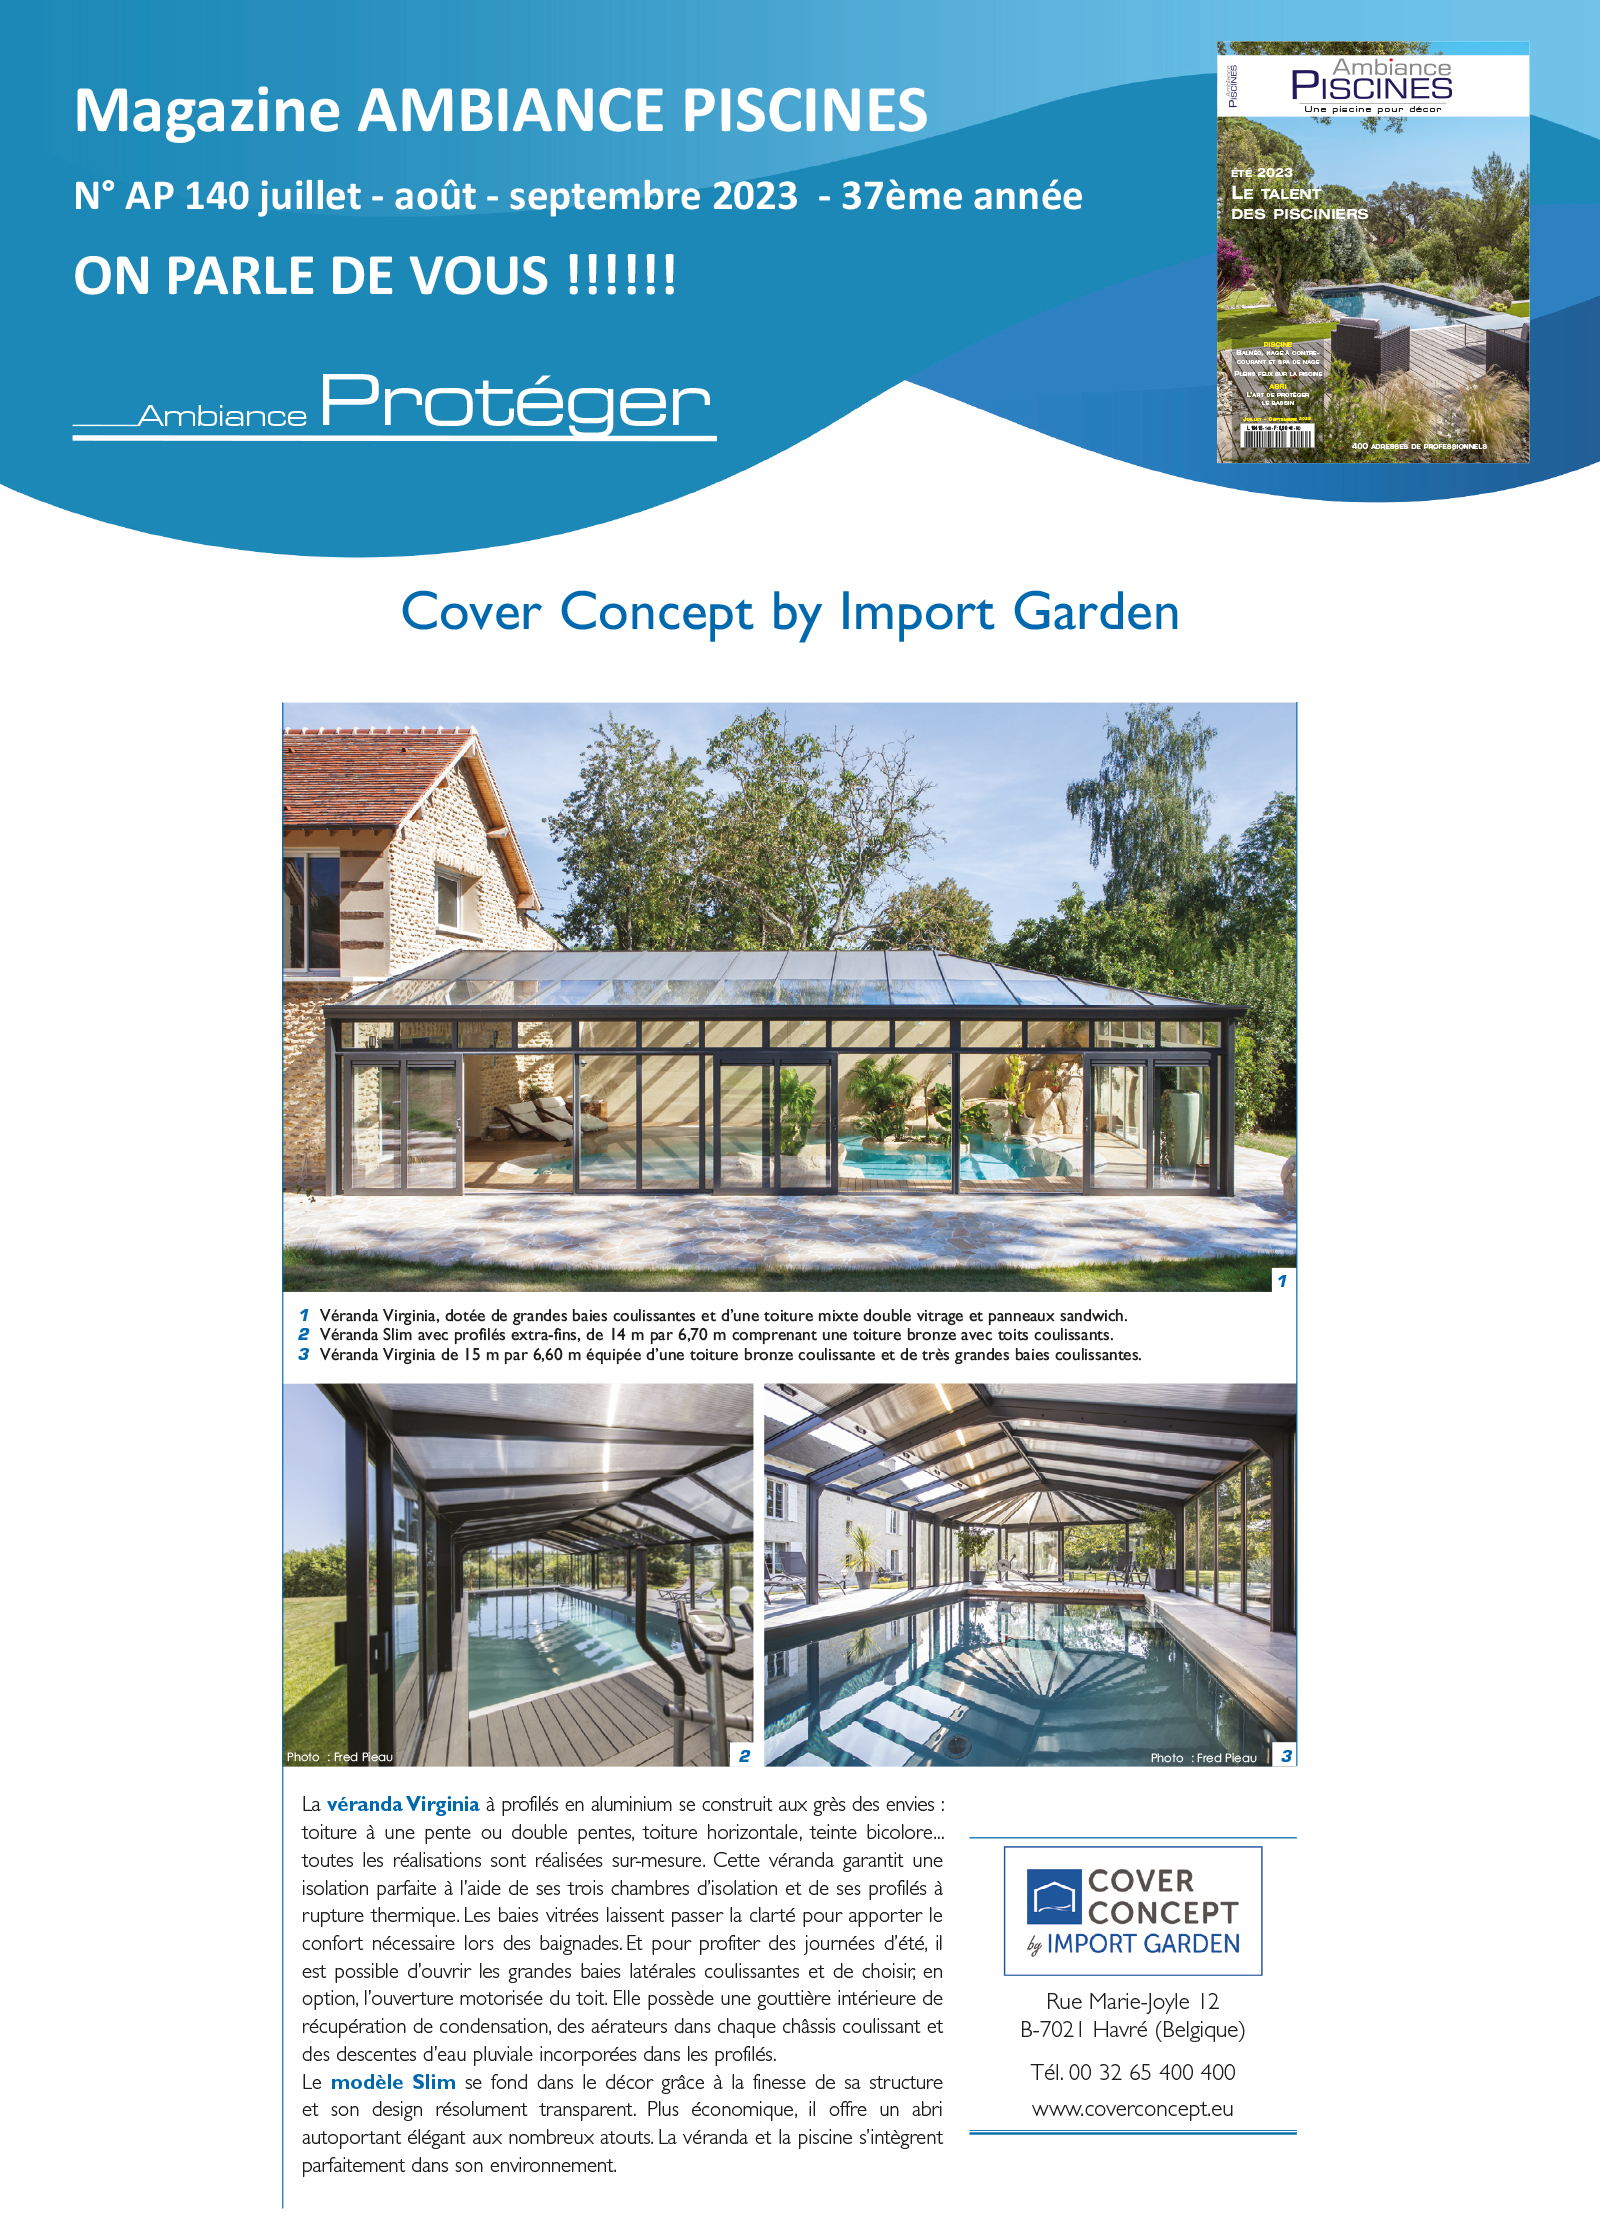 Magazine Ambiance Piscines n° 140 - page 1